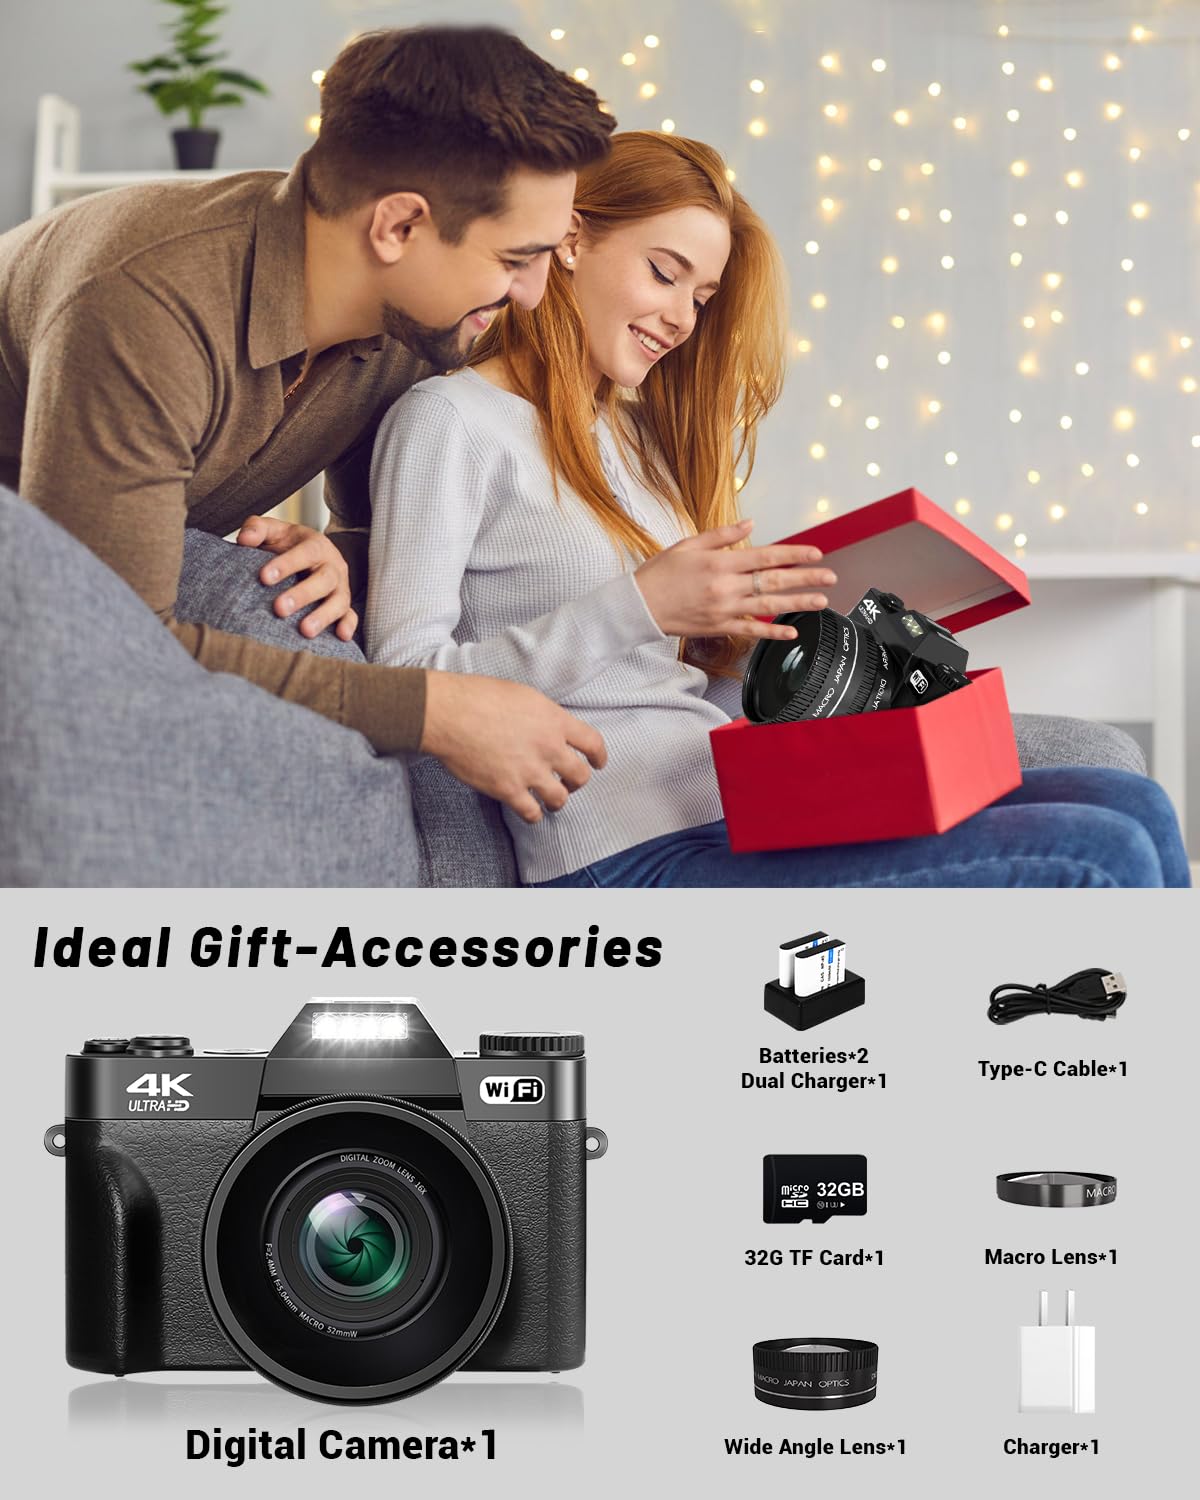 2024 Upgrade 4K Digital Camera for Photography VJIANGER Vlogging Camera with 180° Flip Screen, WiFi 16X Digital Zoom, 52mm Wide Angle & Macro Lens, 2 Batteries, 32GB TF Card(W02-UBlack)